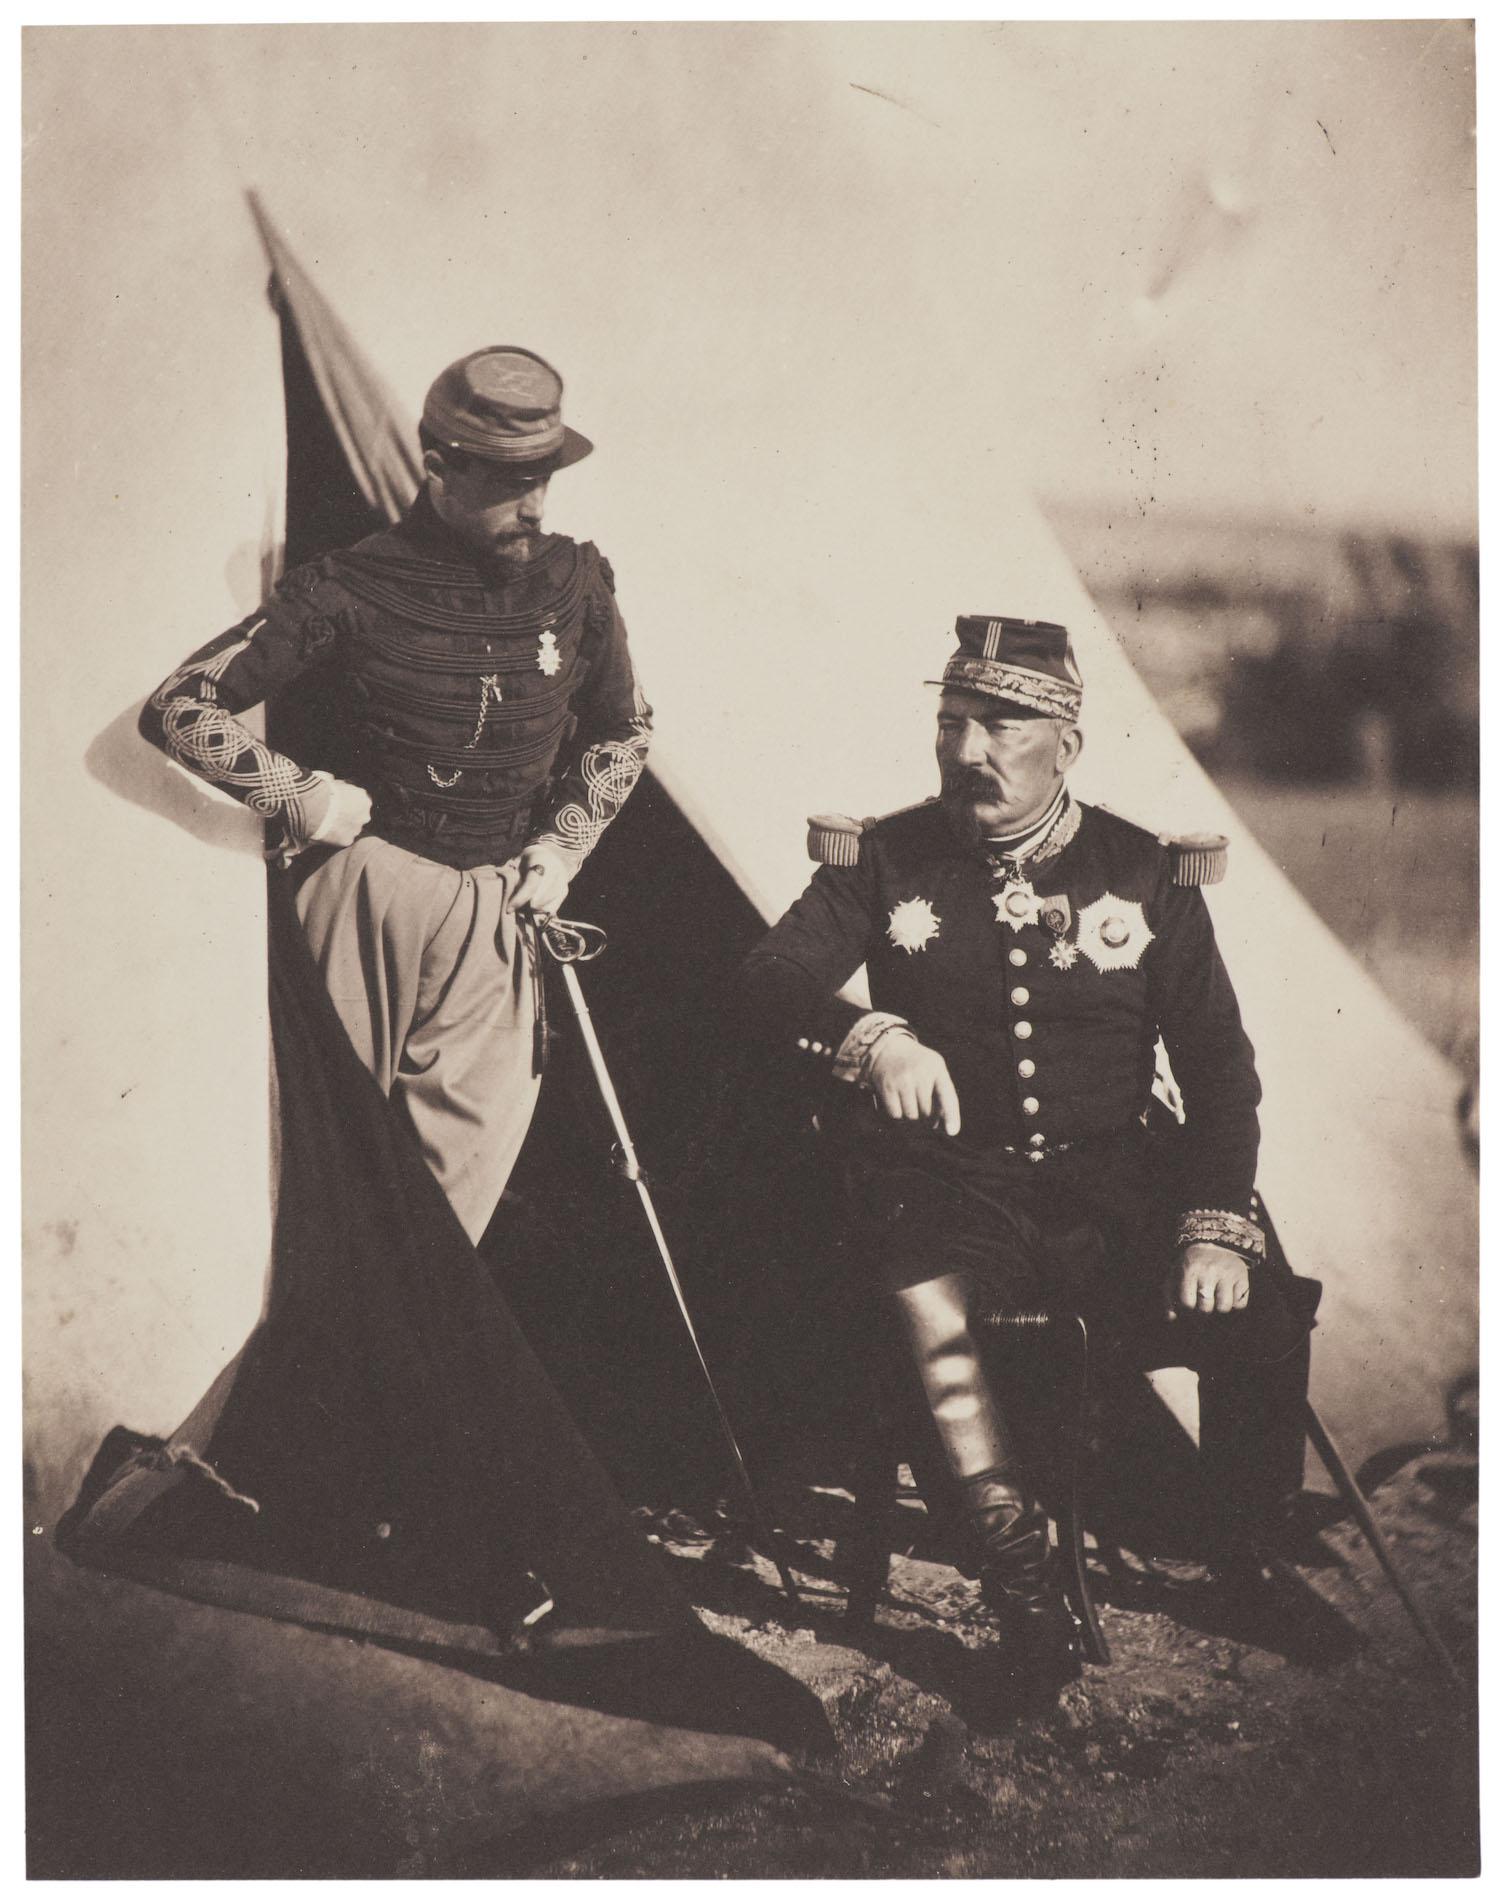 One man standing in the doorway of a tent, leaning on a rifle, another man sitting outside the tent. Both are wearing military uniforms.